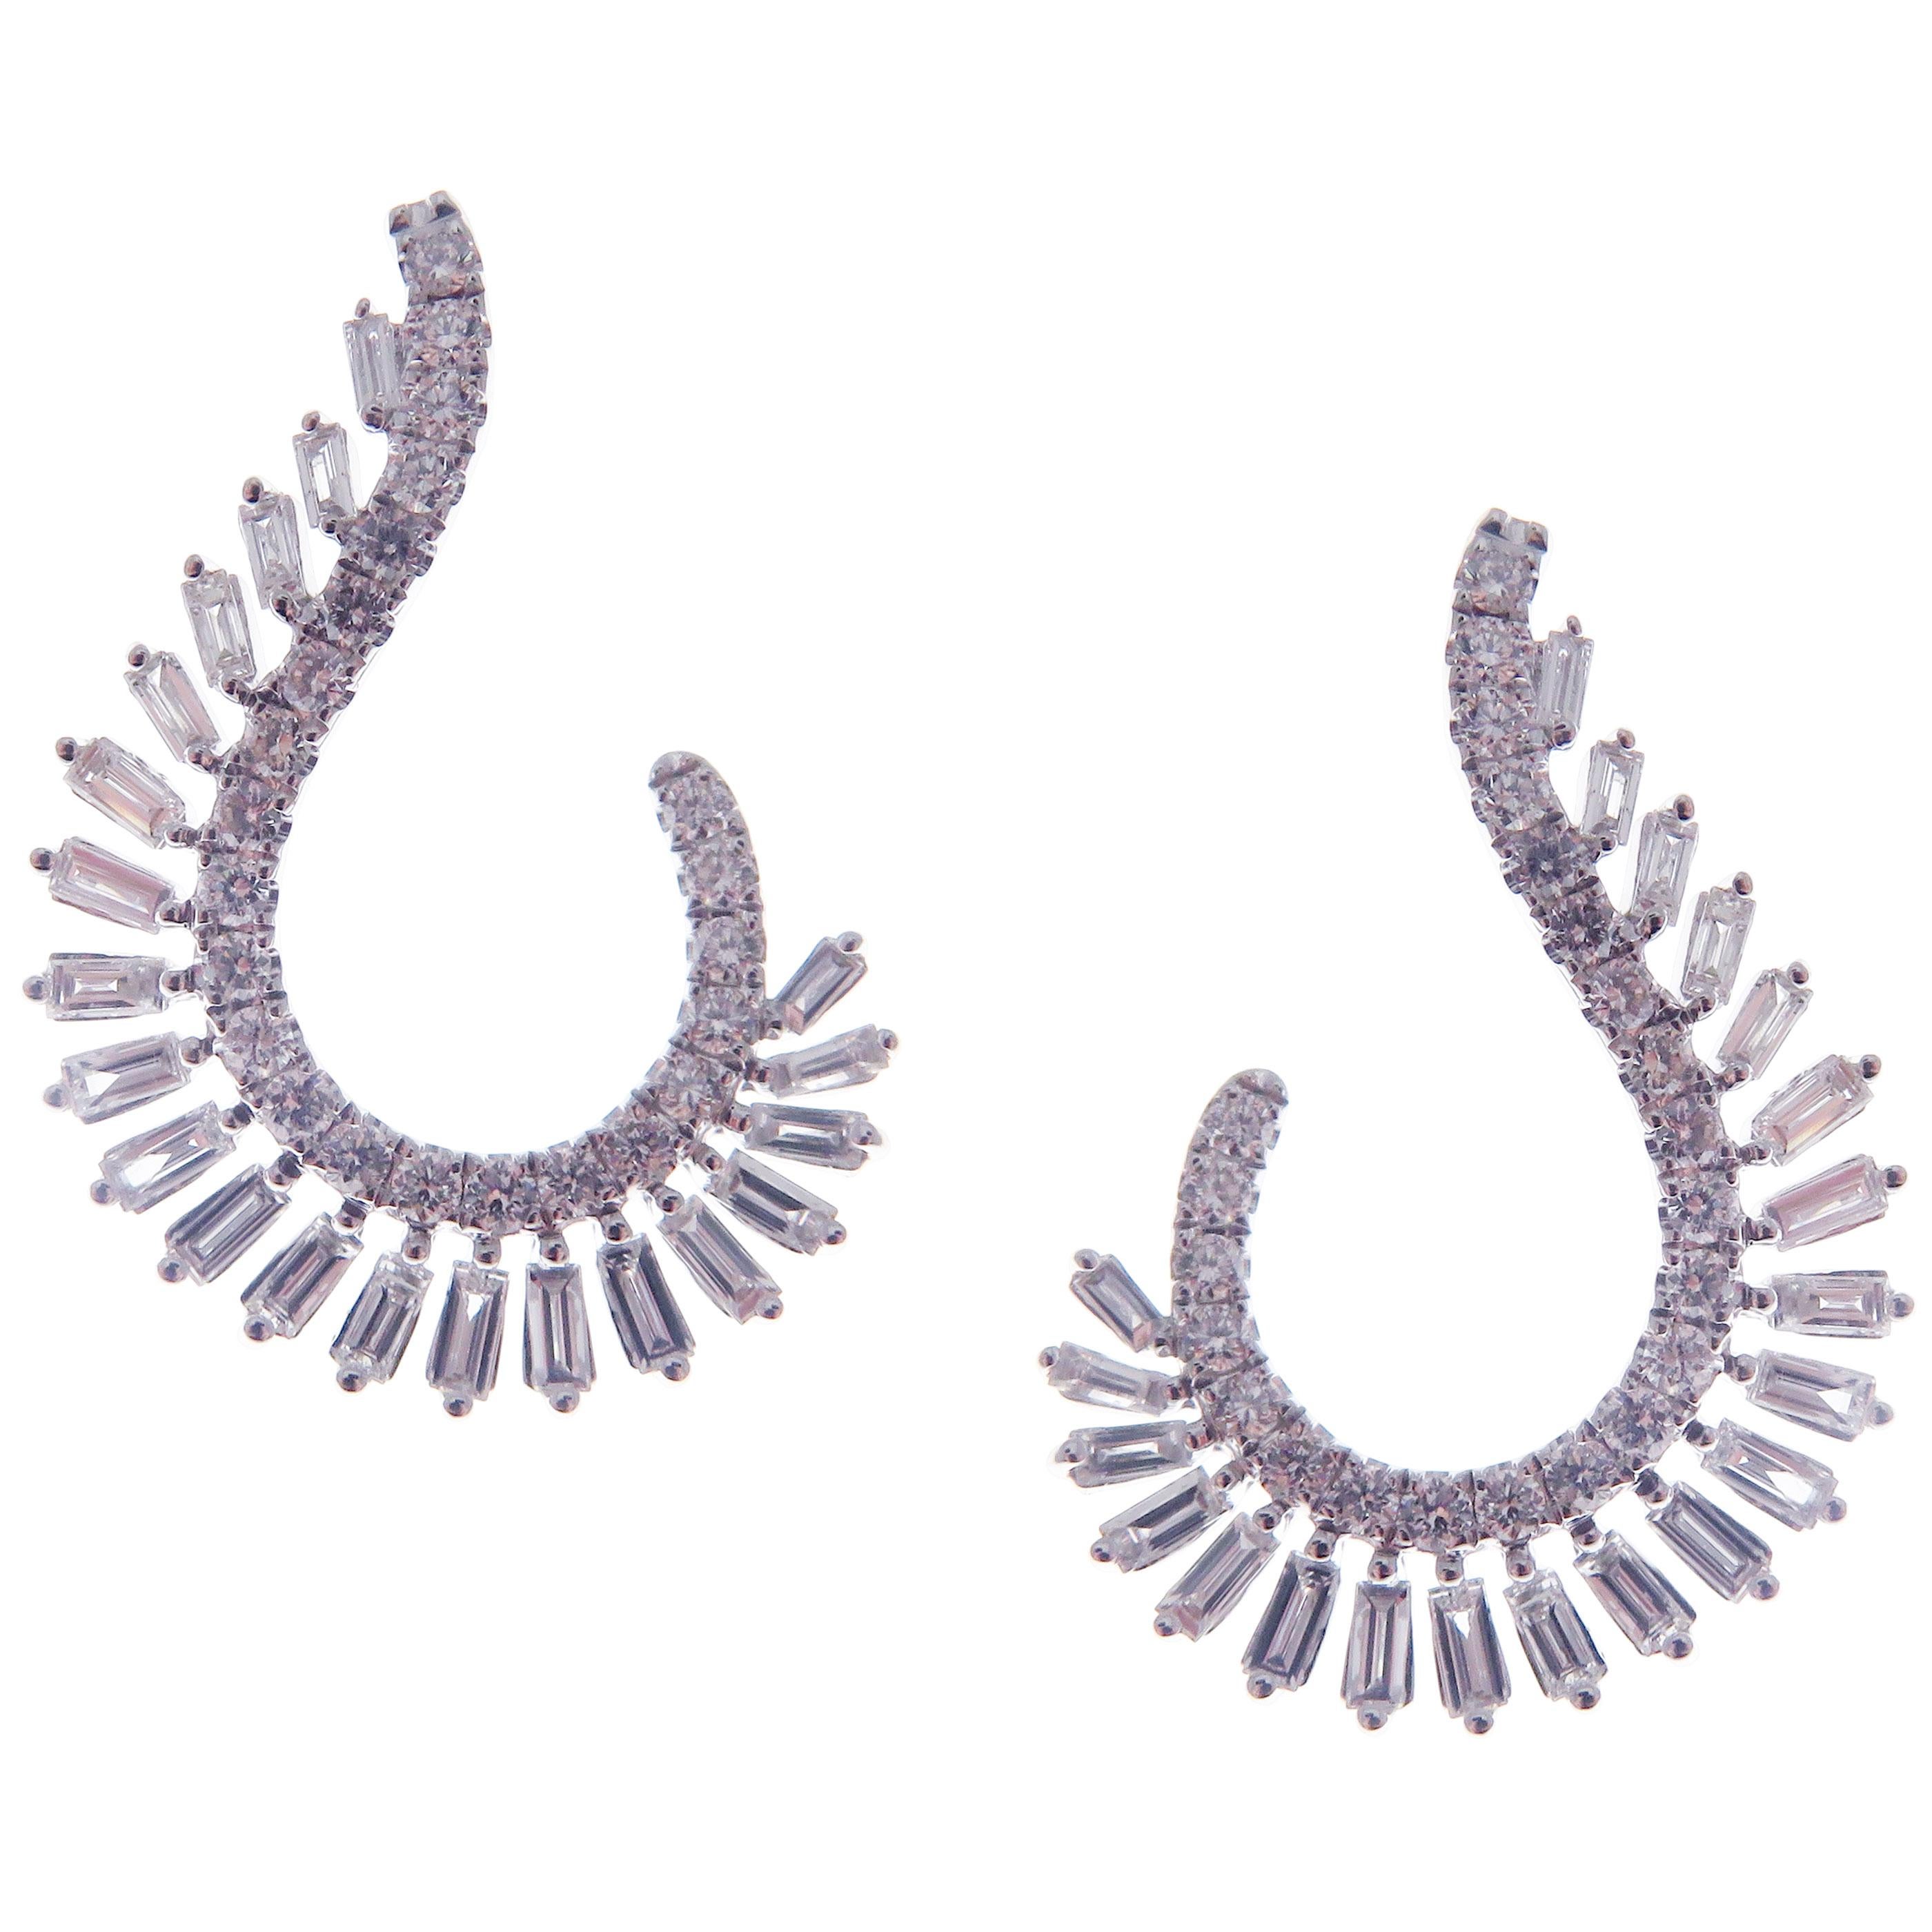 These trendy twisty wings earrings with round and baguette white diamonds are crafted in 18-karat white gold, featuring 48 round white diamonds totaling of 0.51 carats and 42 baguette white diamonds totaling of 0.88 carats.
These earrings come with